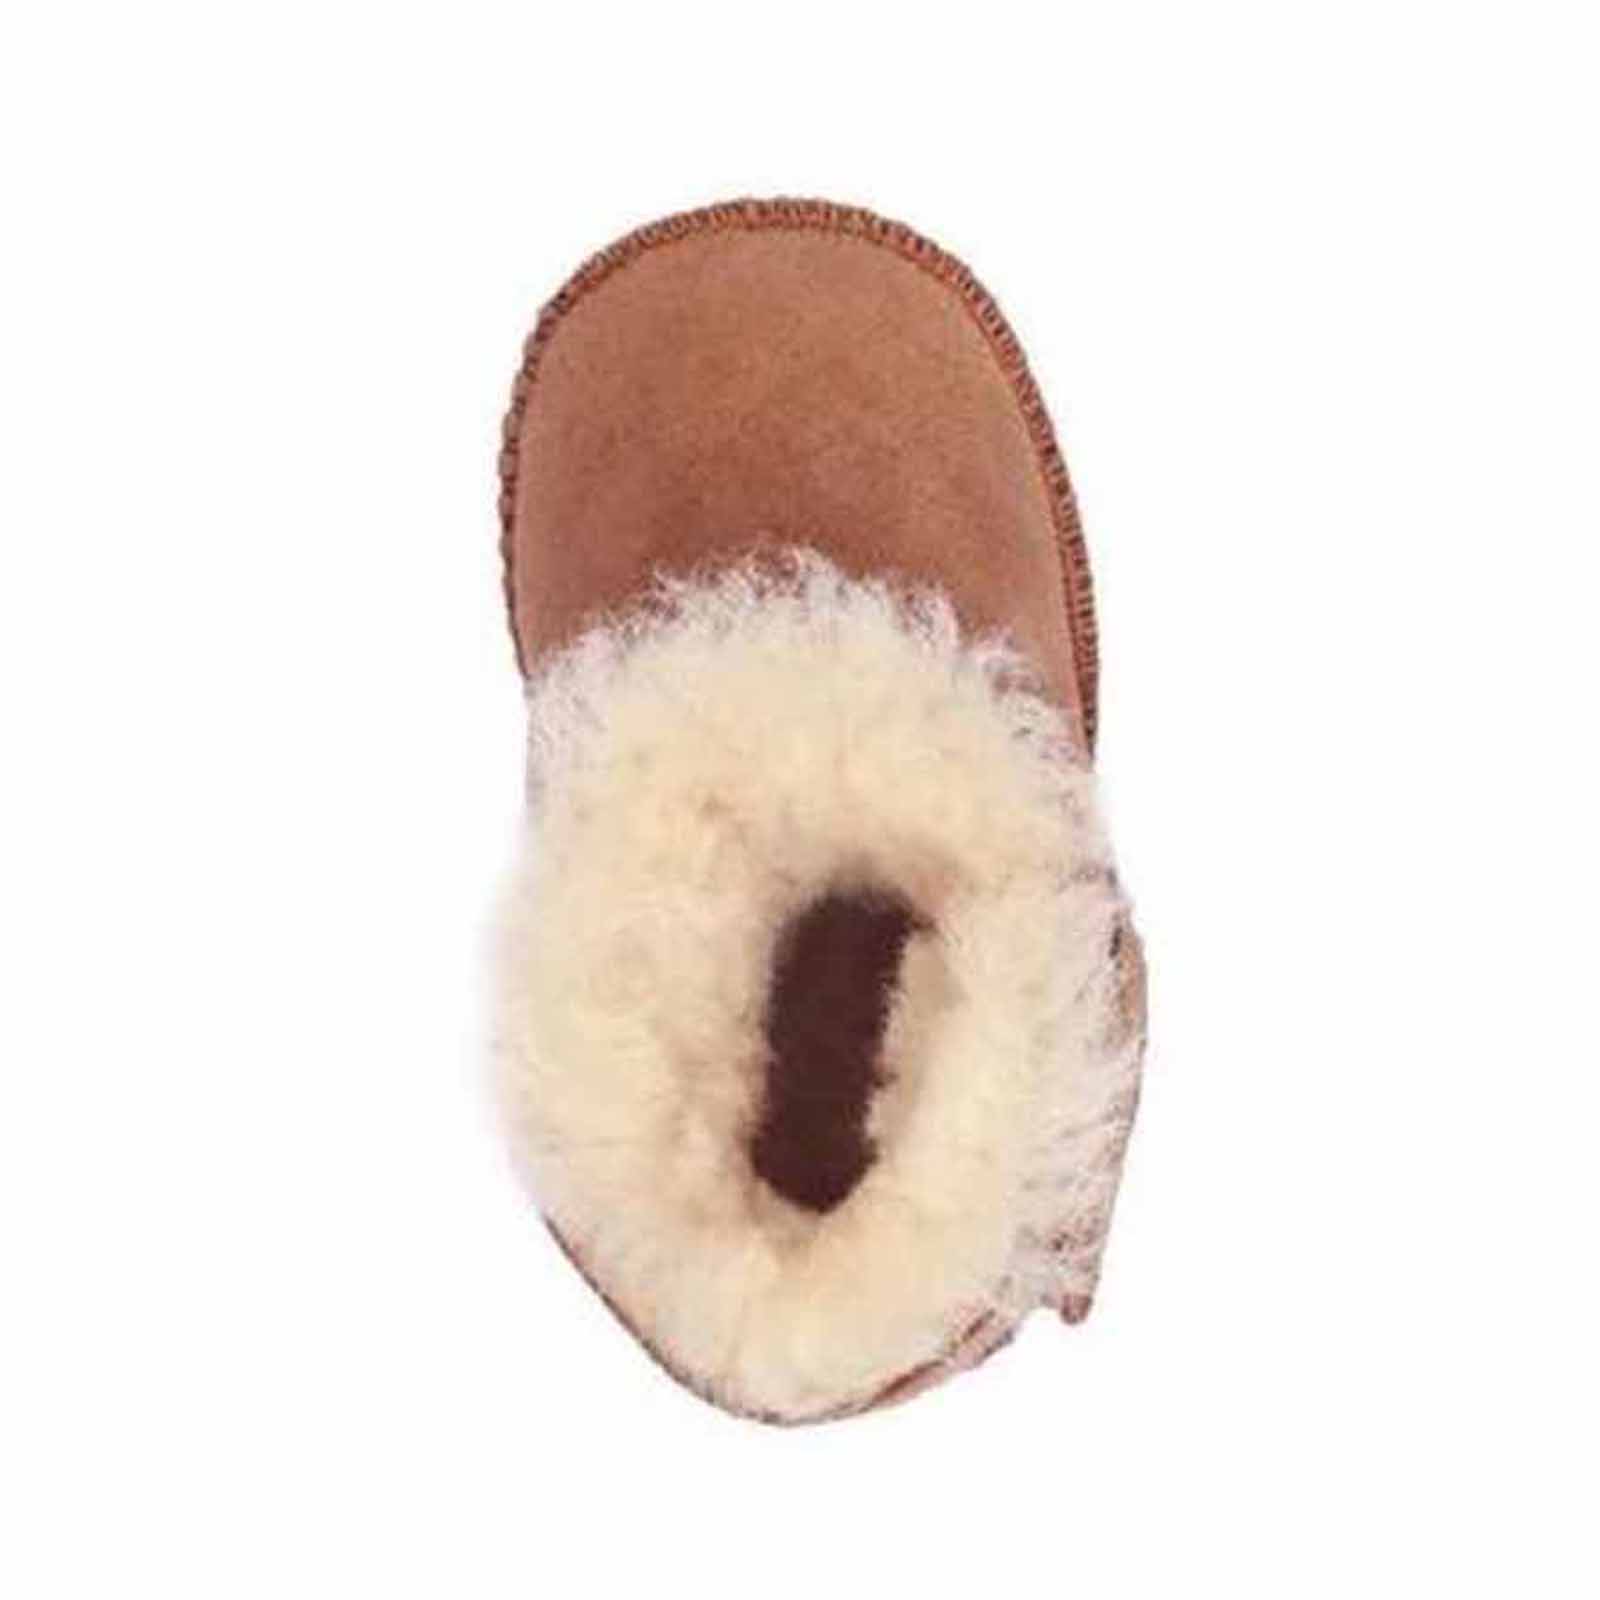 Ozwear UGG Boots Classic Baby Chestnut